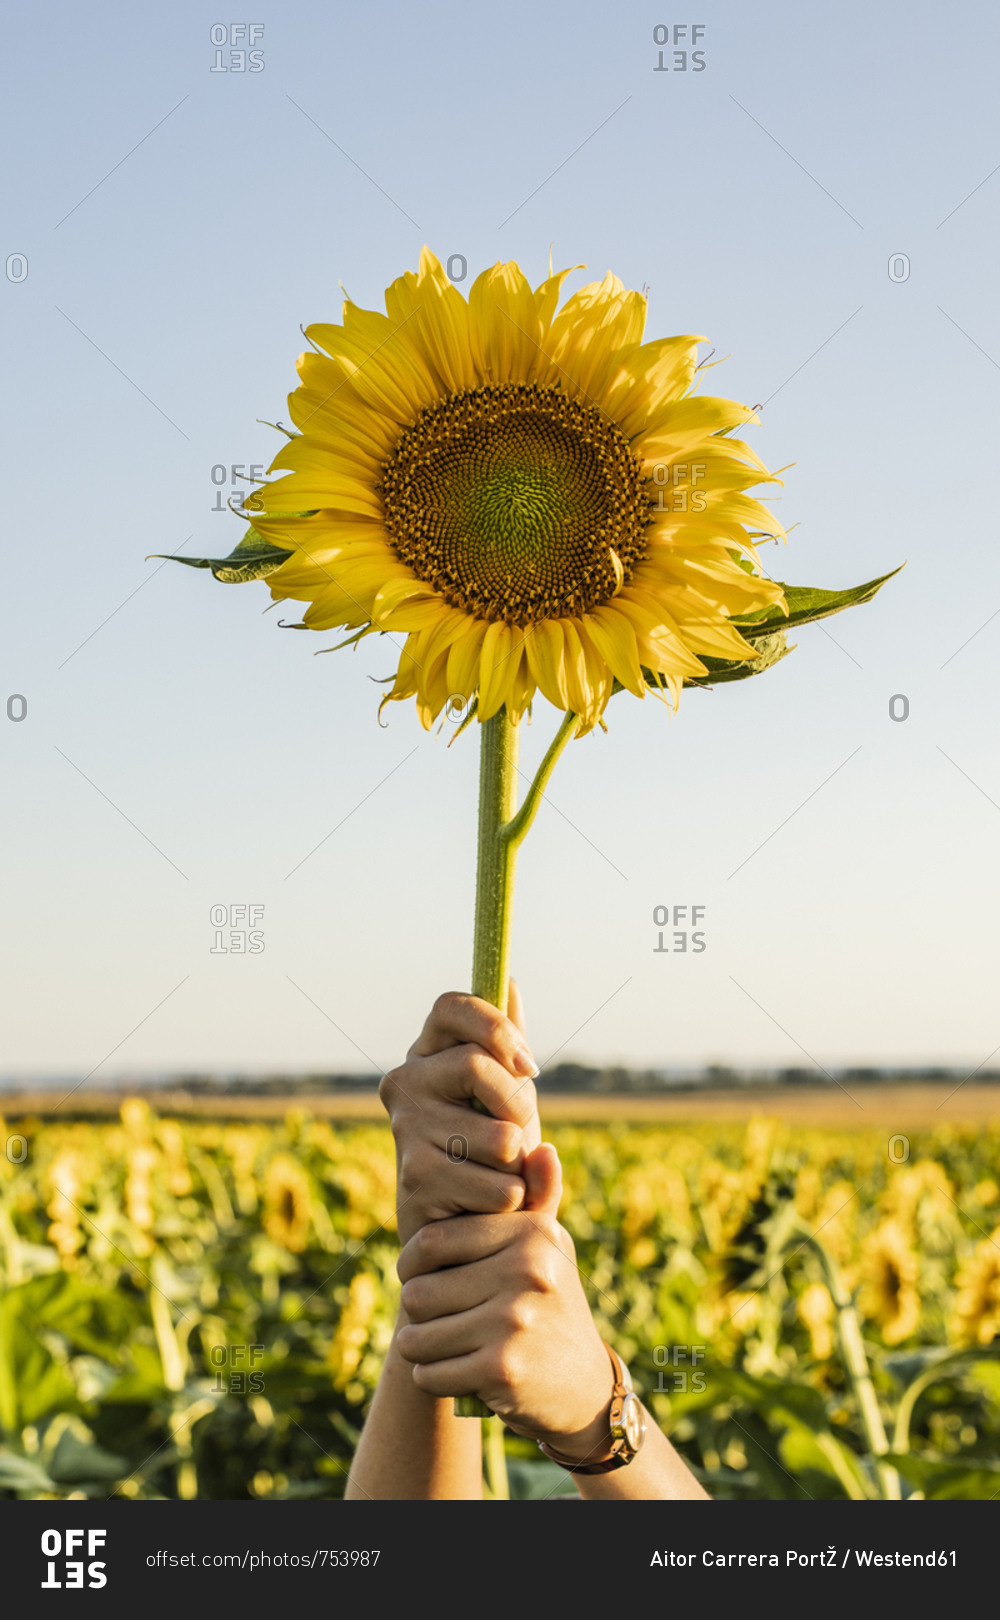 Hands of a woman in a field lifting a sunflower